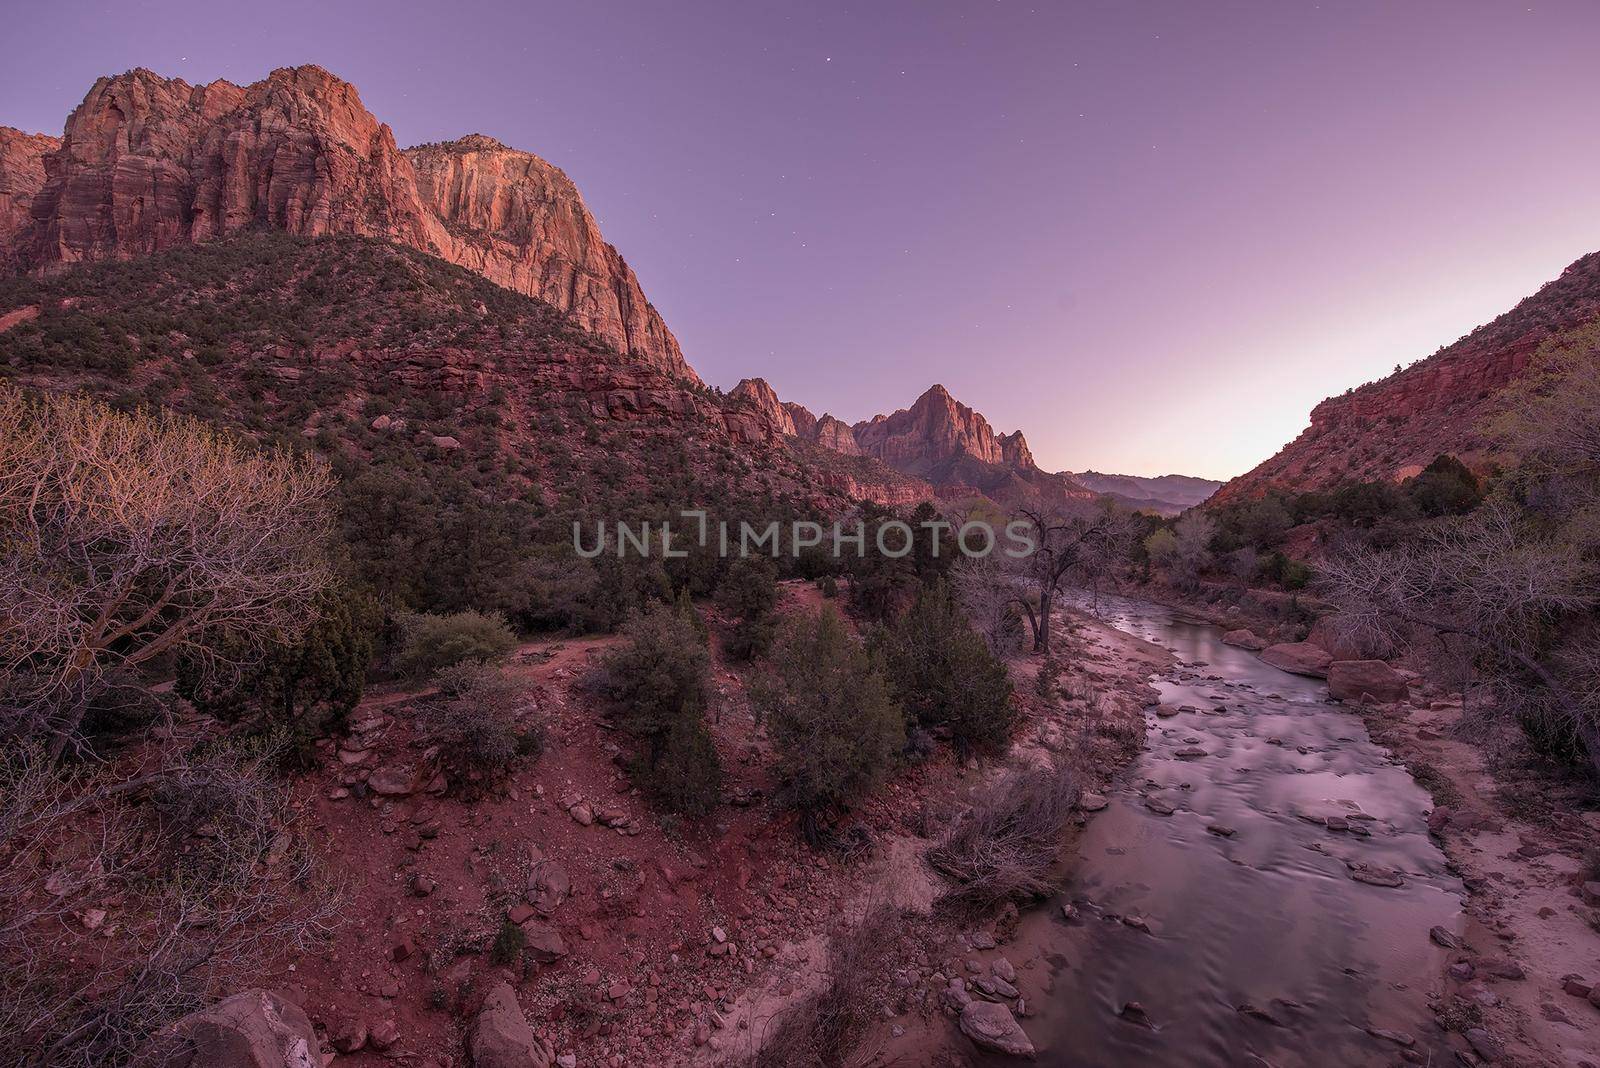 Virgin River in Zion National Park. Zion Landscape at Dusk. Springdale, Utah, United States. by welcomia